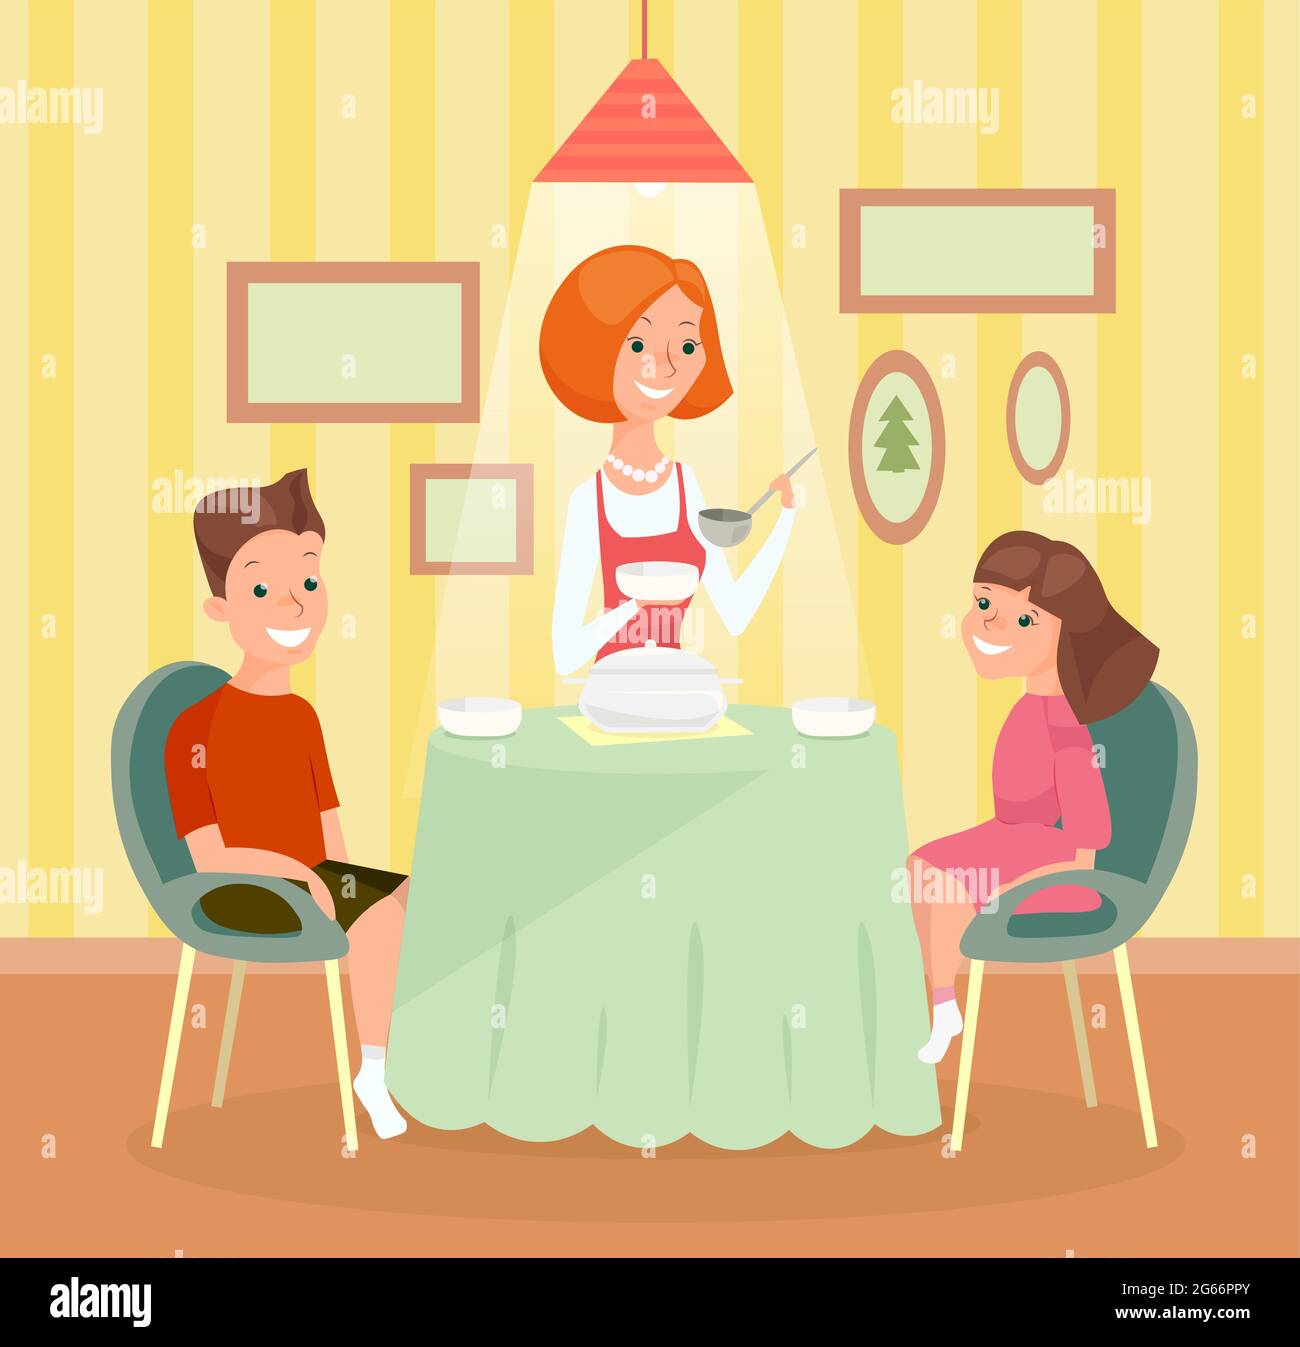 Vector illustration of family meal concept. Mother , son and daughter together at the table and have dinner in cartoon flat style. Stock Vector